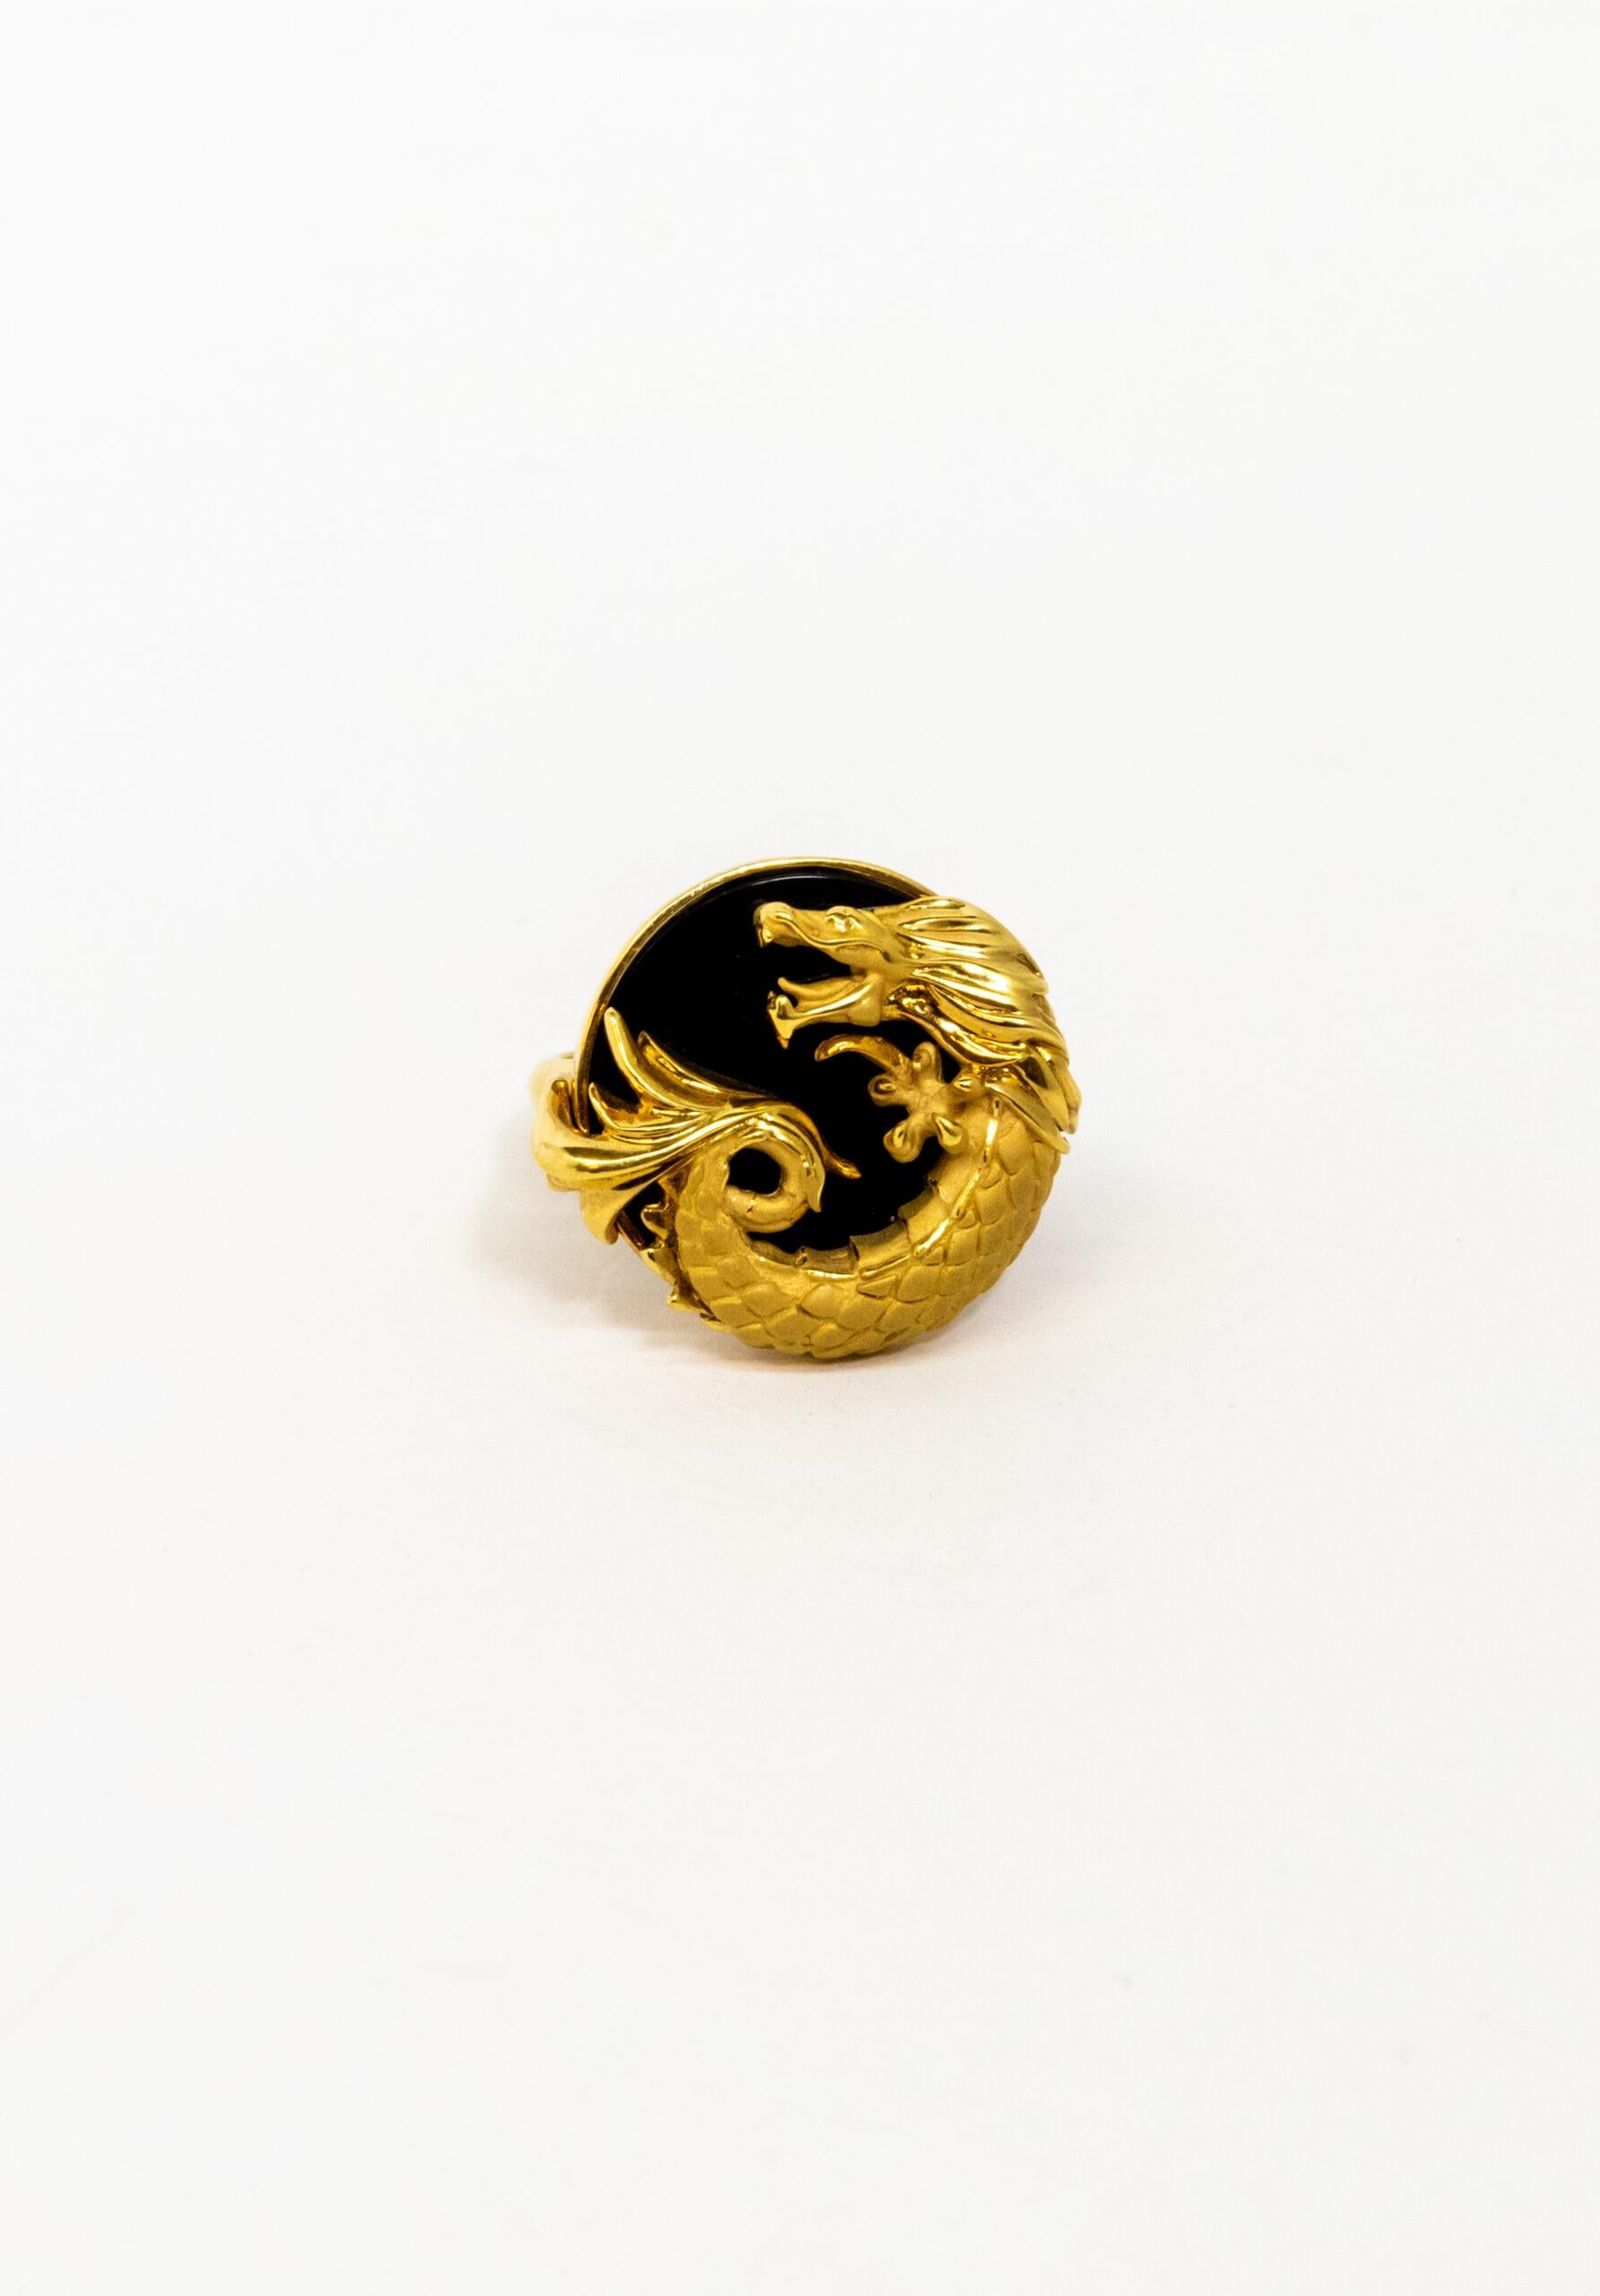 This ring is made of 18K Yellow Gold. Face side made of black Onyx and decorated with a 18K Yellow Gold dragon figure.

Size – 54.5 (7 US)